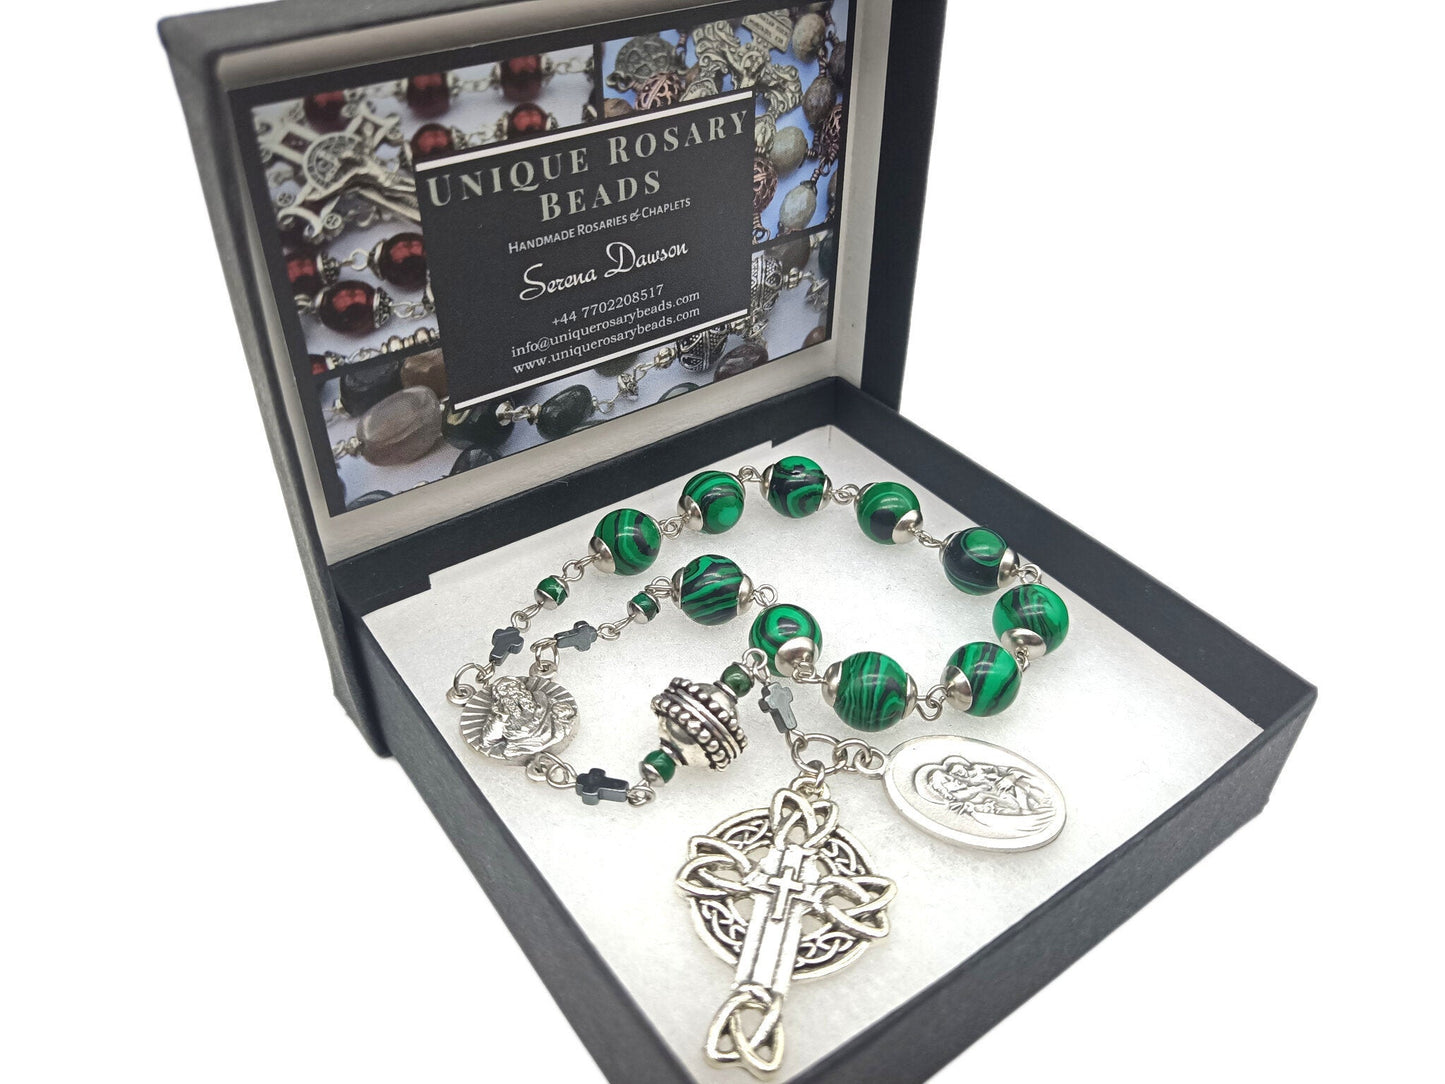 Saint Joseph unique rosary beads single decade with green gemstone beads, silver crucifix and St. Joseph medals.